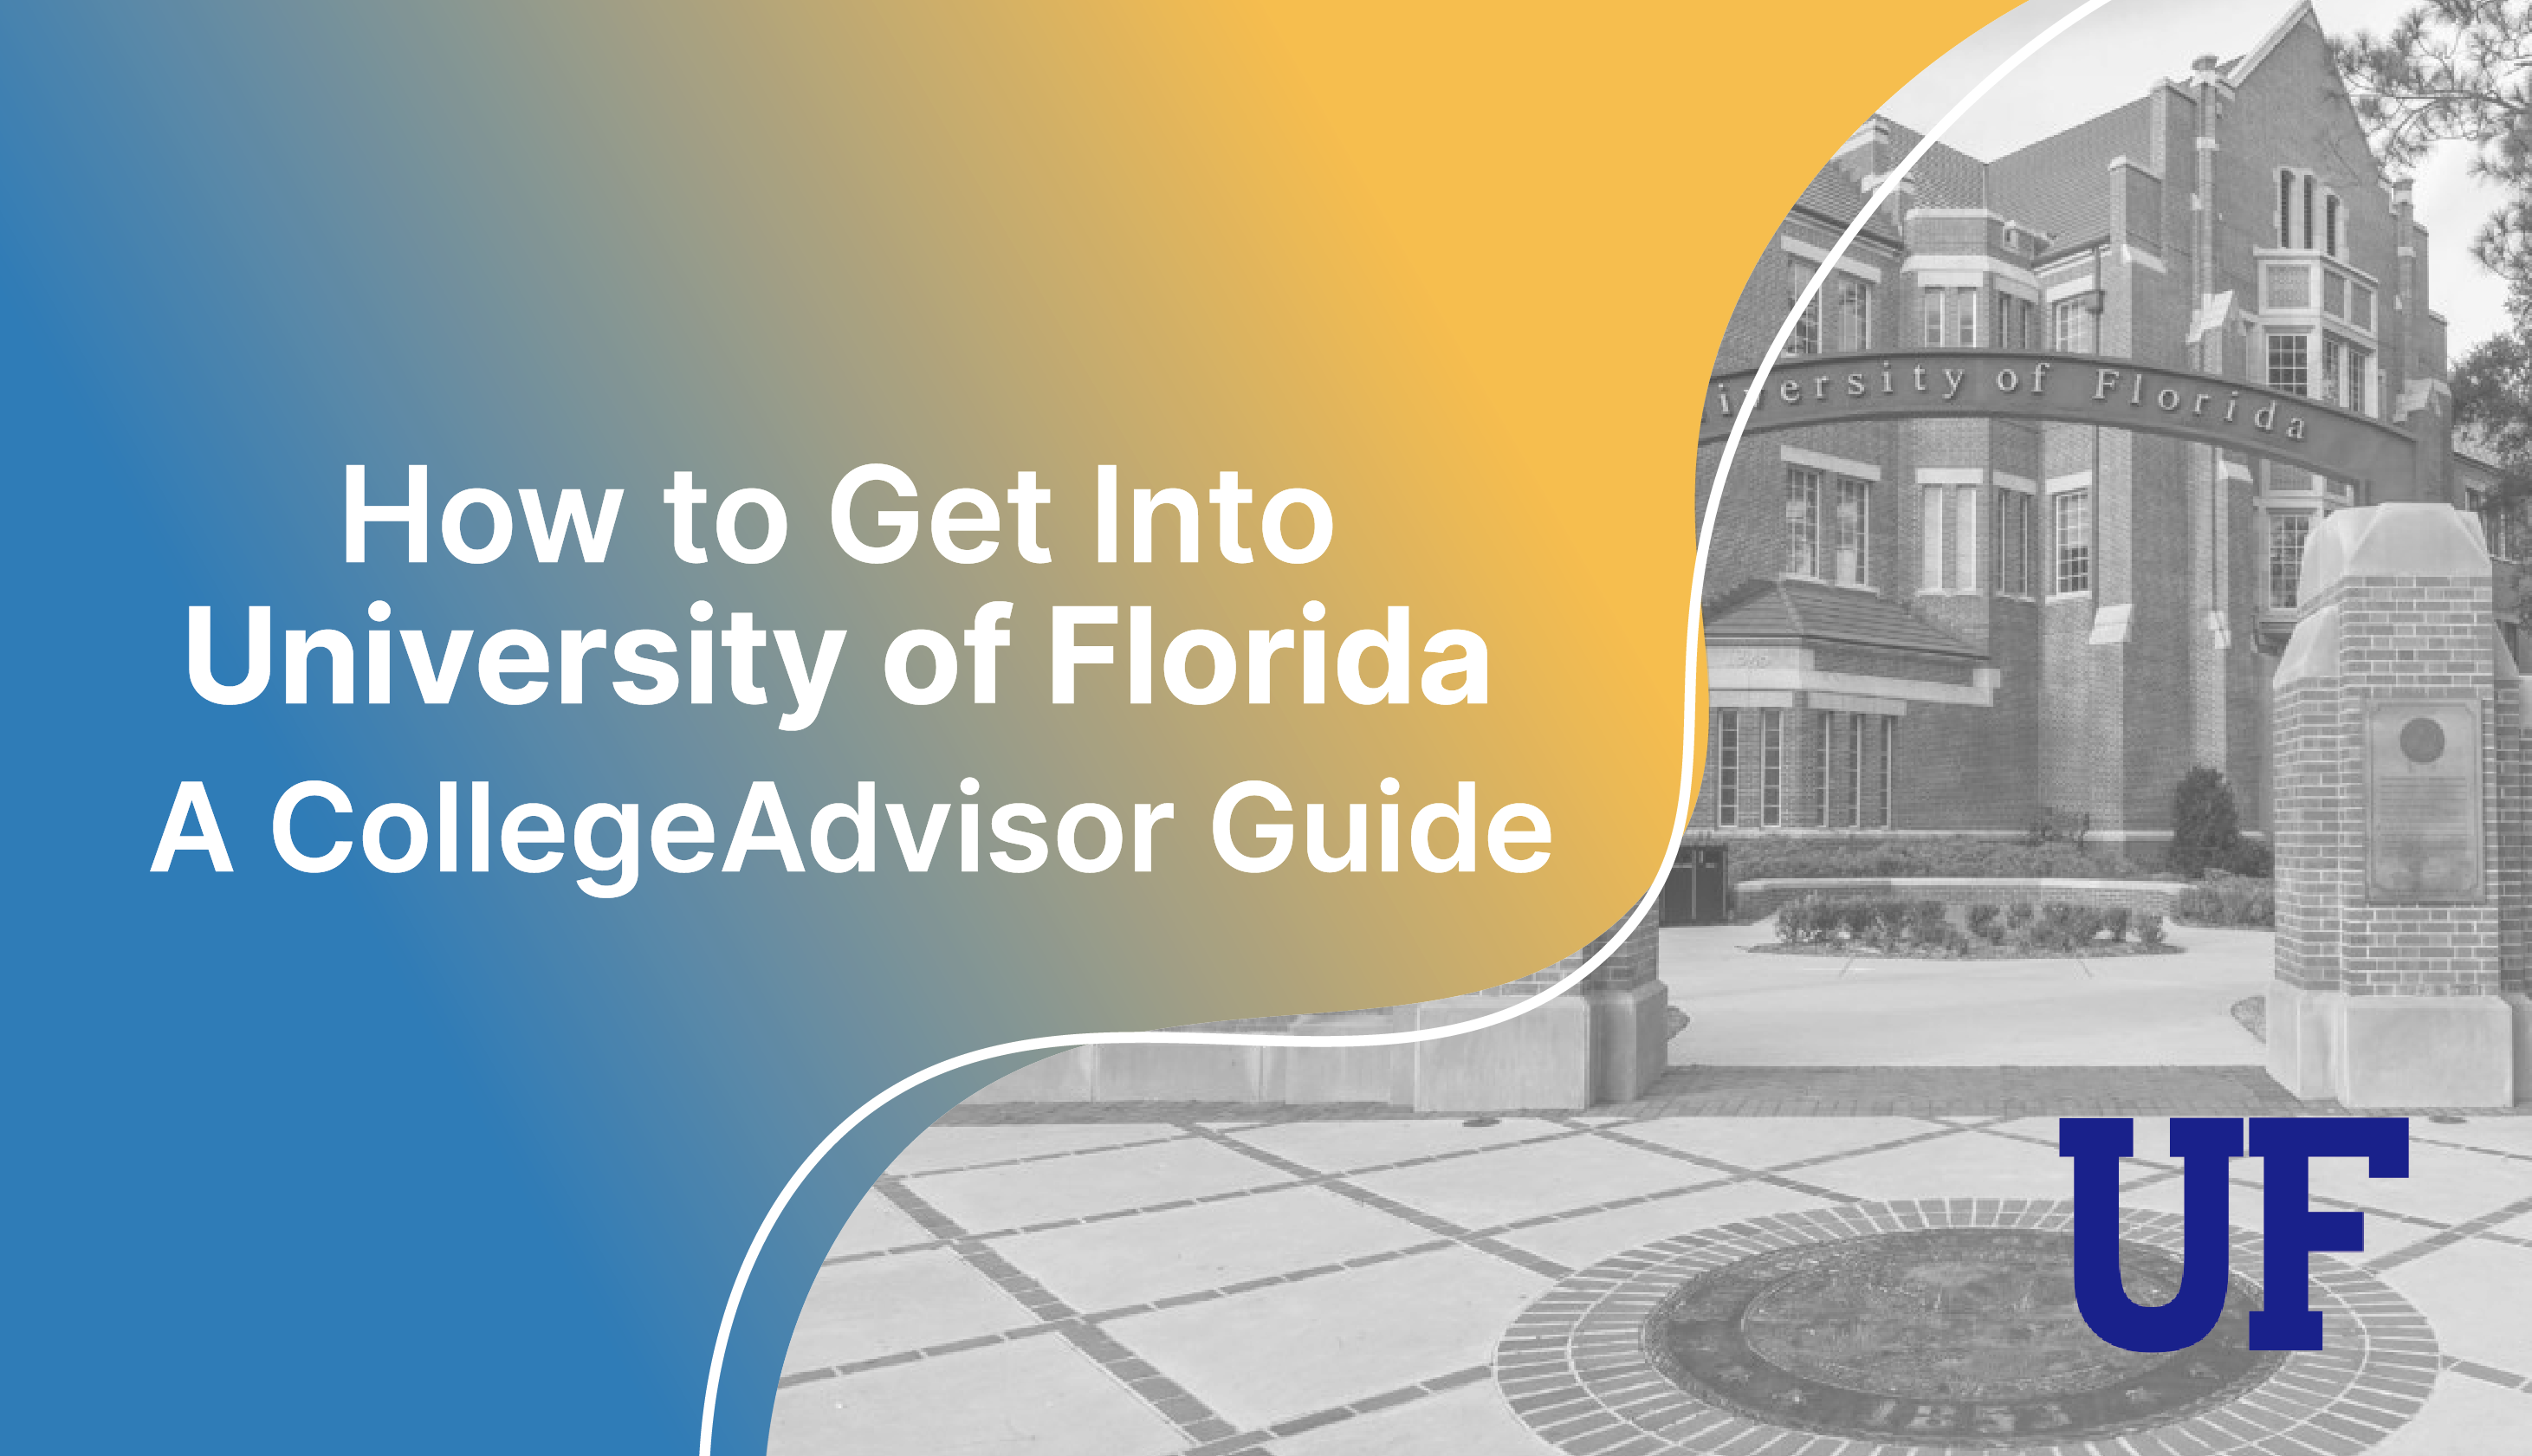 How to Get Into UF Guide